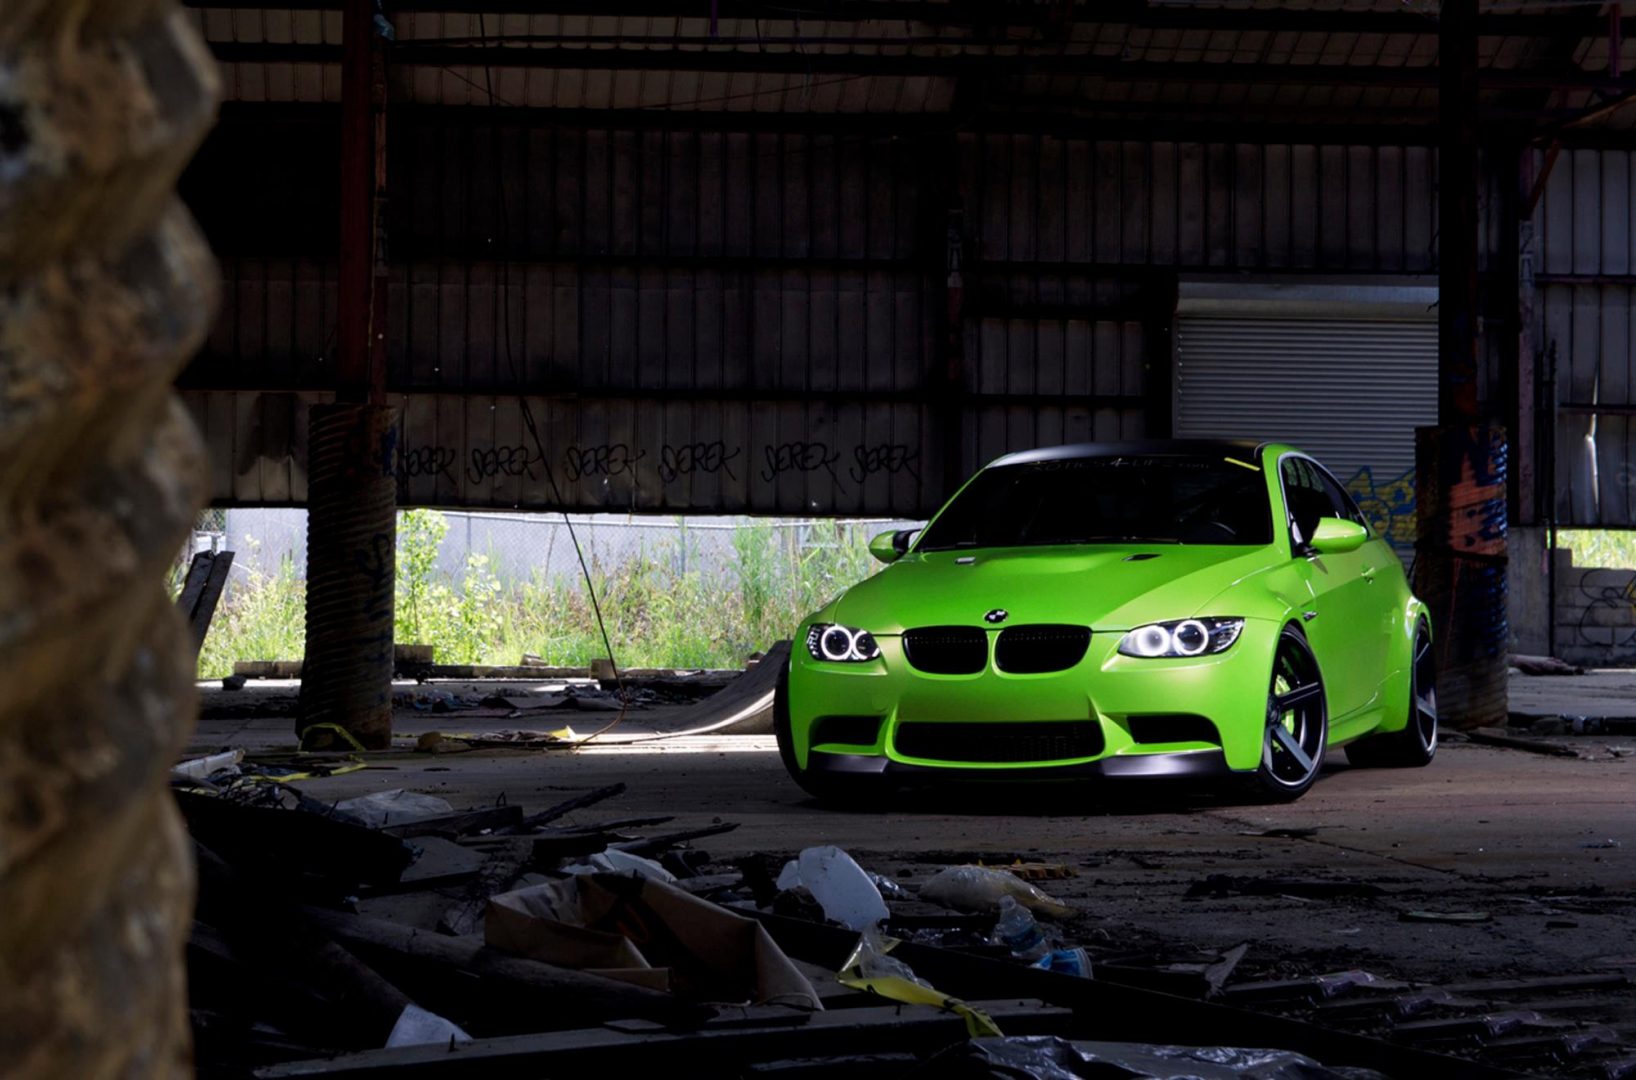 BMW Picture, Car, Green, Hd, Stunning, Wallpaper, Vehicles, #876